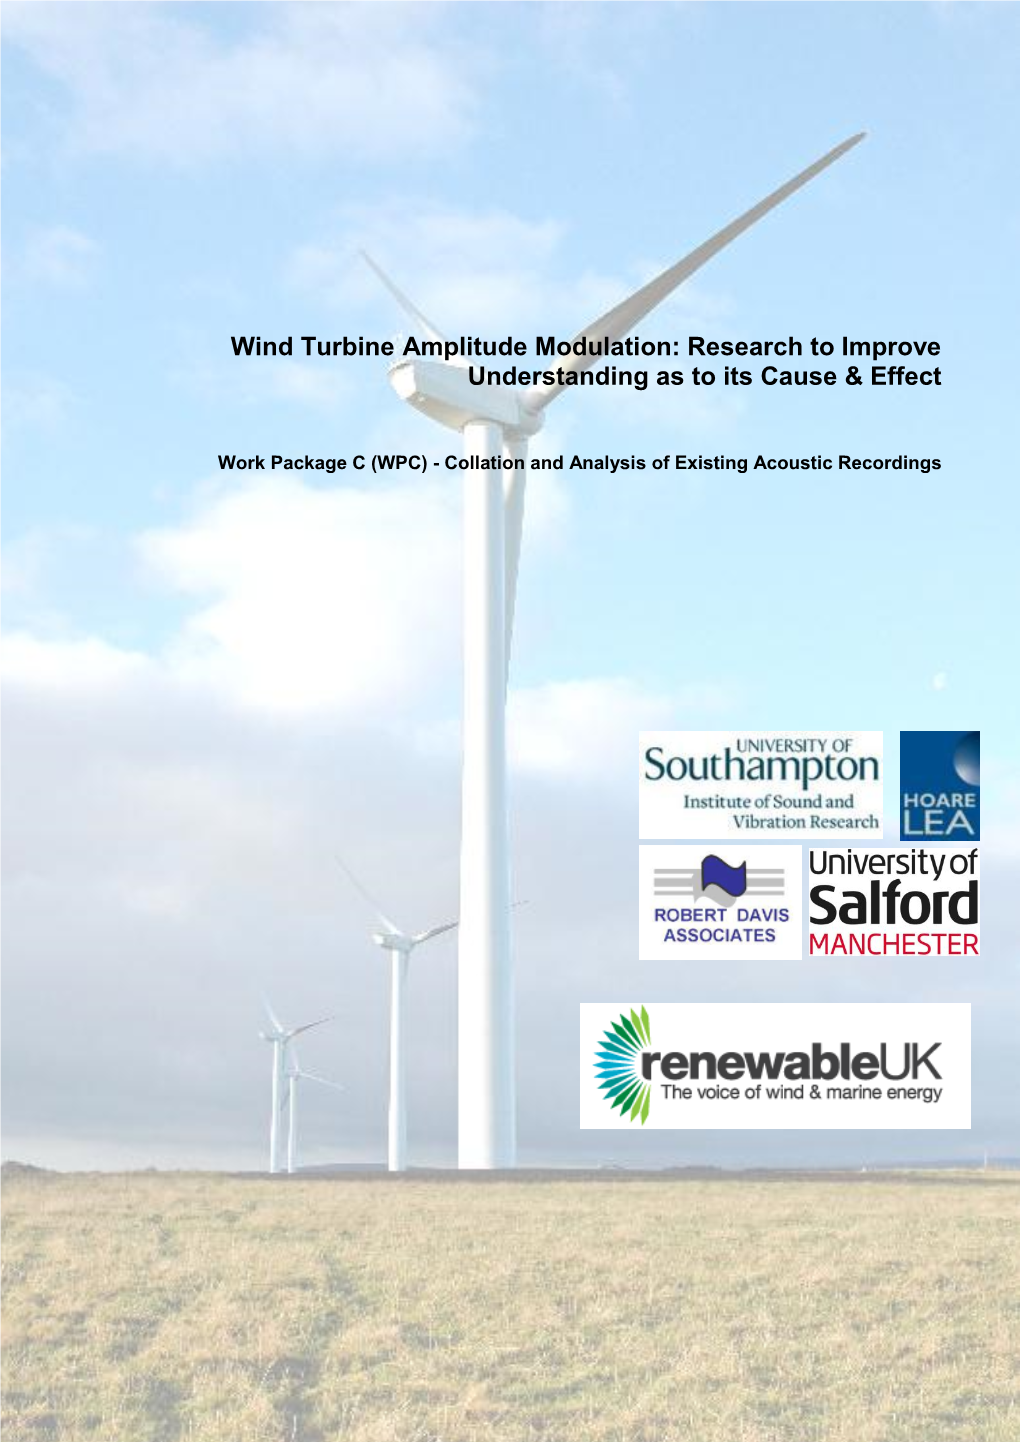 Wind Turbine Amplitude Modulation: Research to Improve Understanding As to Its Cause & Effect